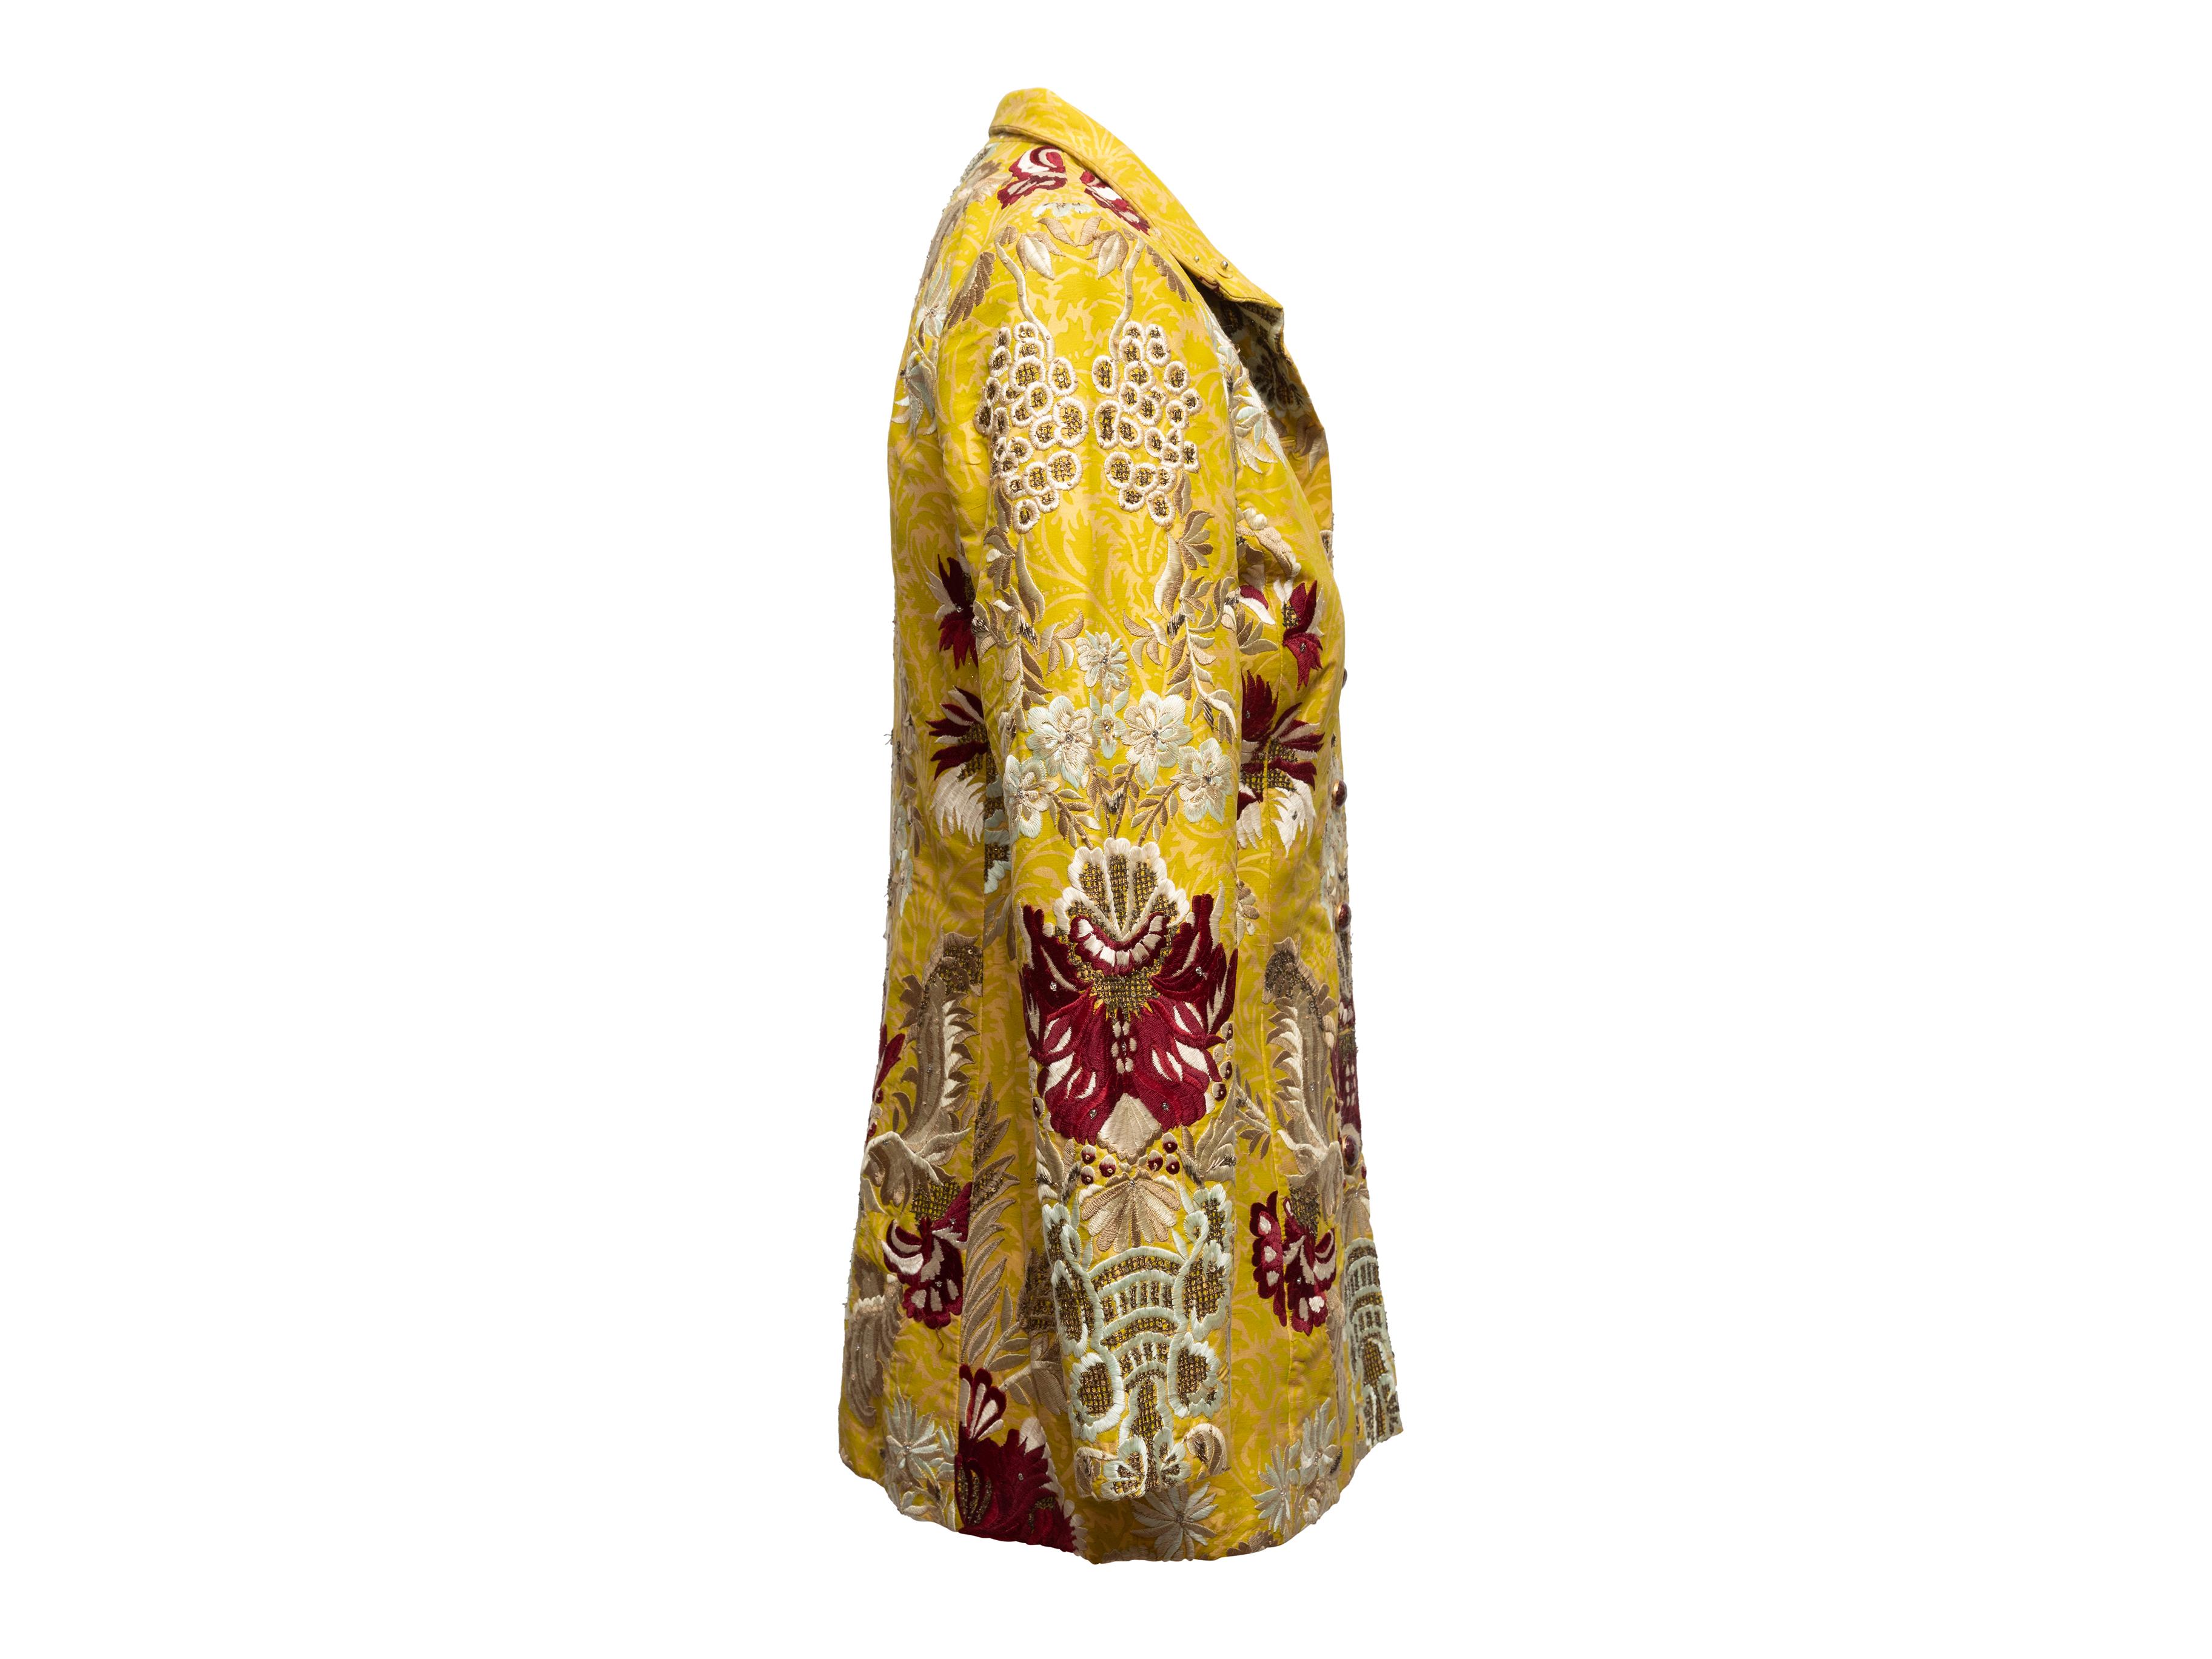 Product Details: Yellow and multicolor embroidered jacket by Oscar de la Renta. Circa 2003. Pointed collar. Beaded floral embroidery throughout. Button closures at center front. Designer size 4. 34